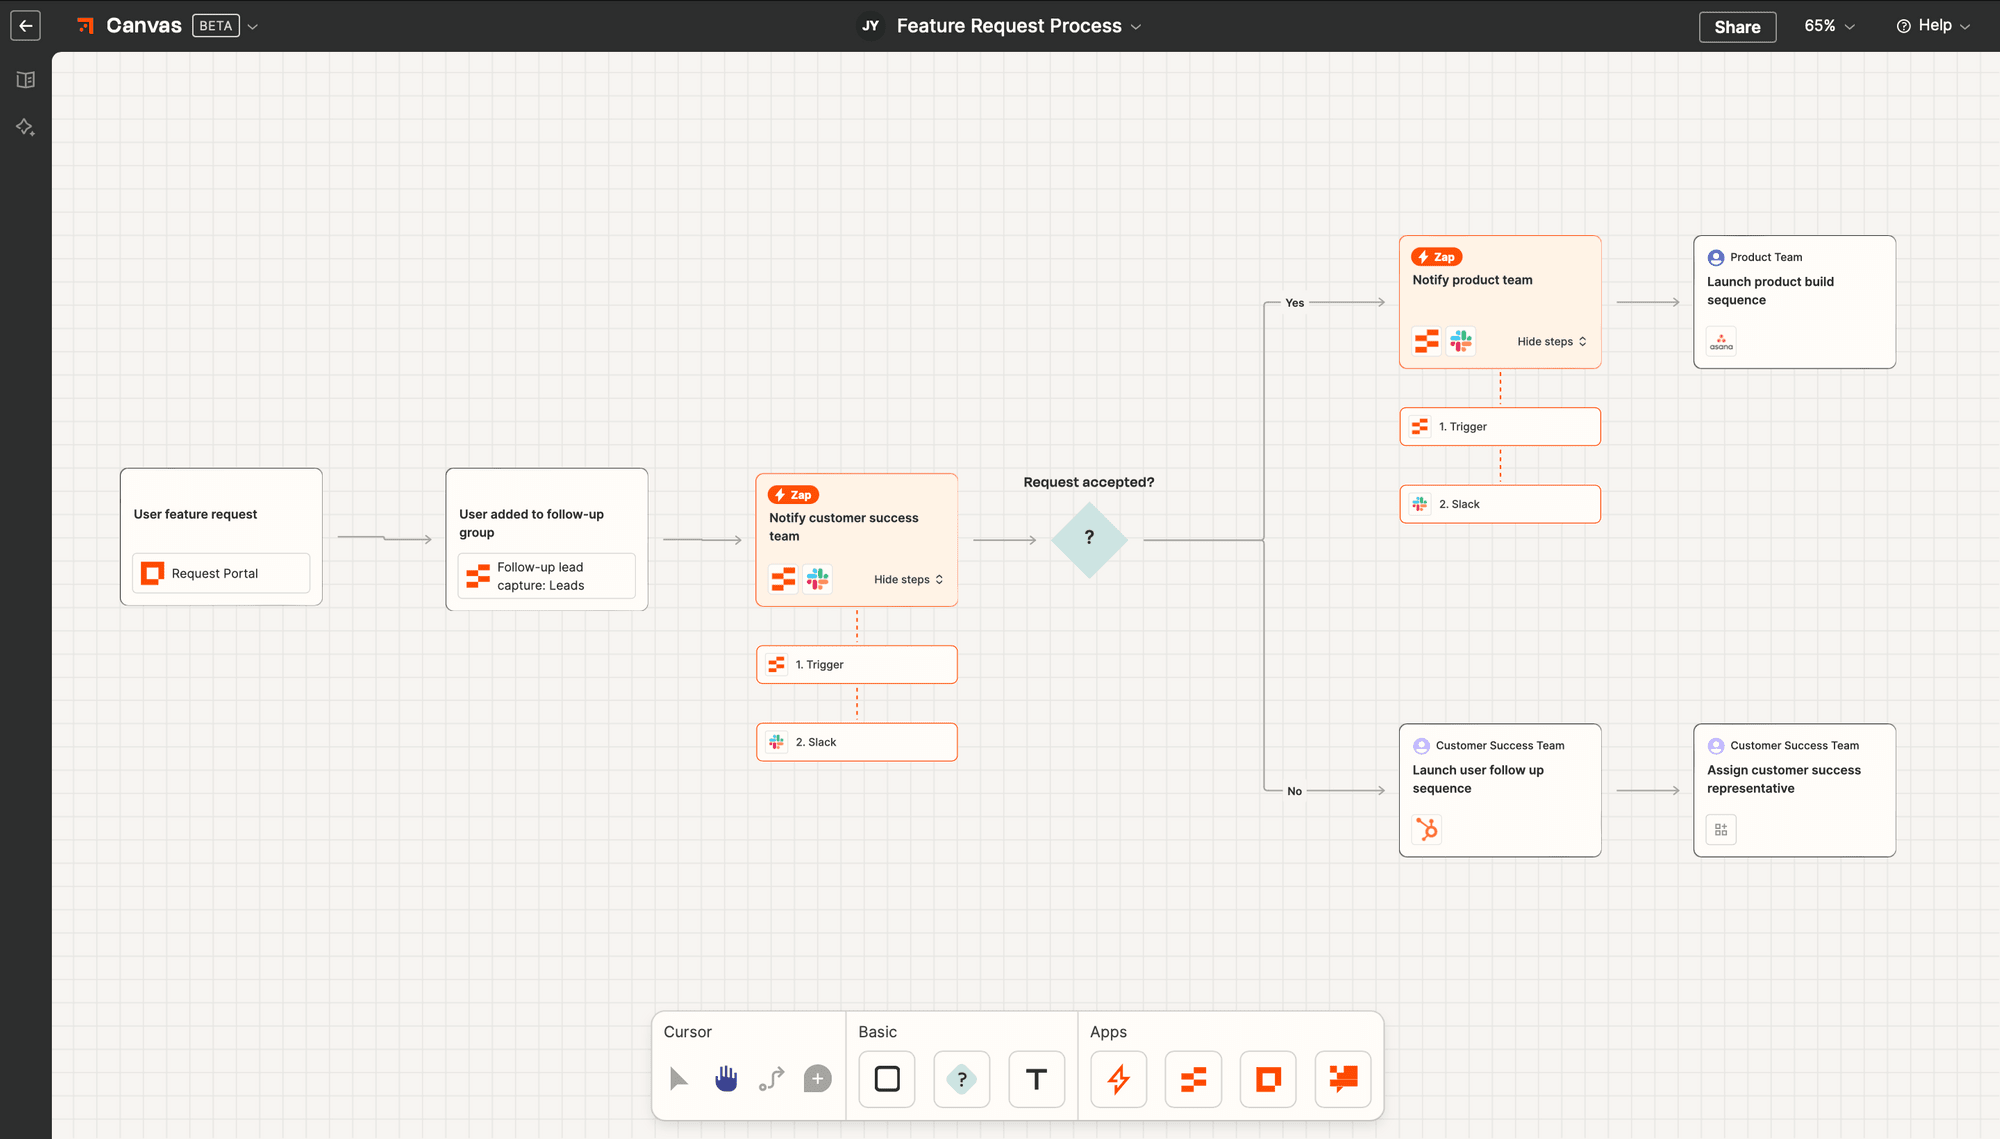 Screenshot of Zapier Canvas product management process example